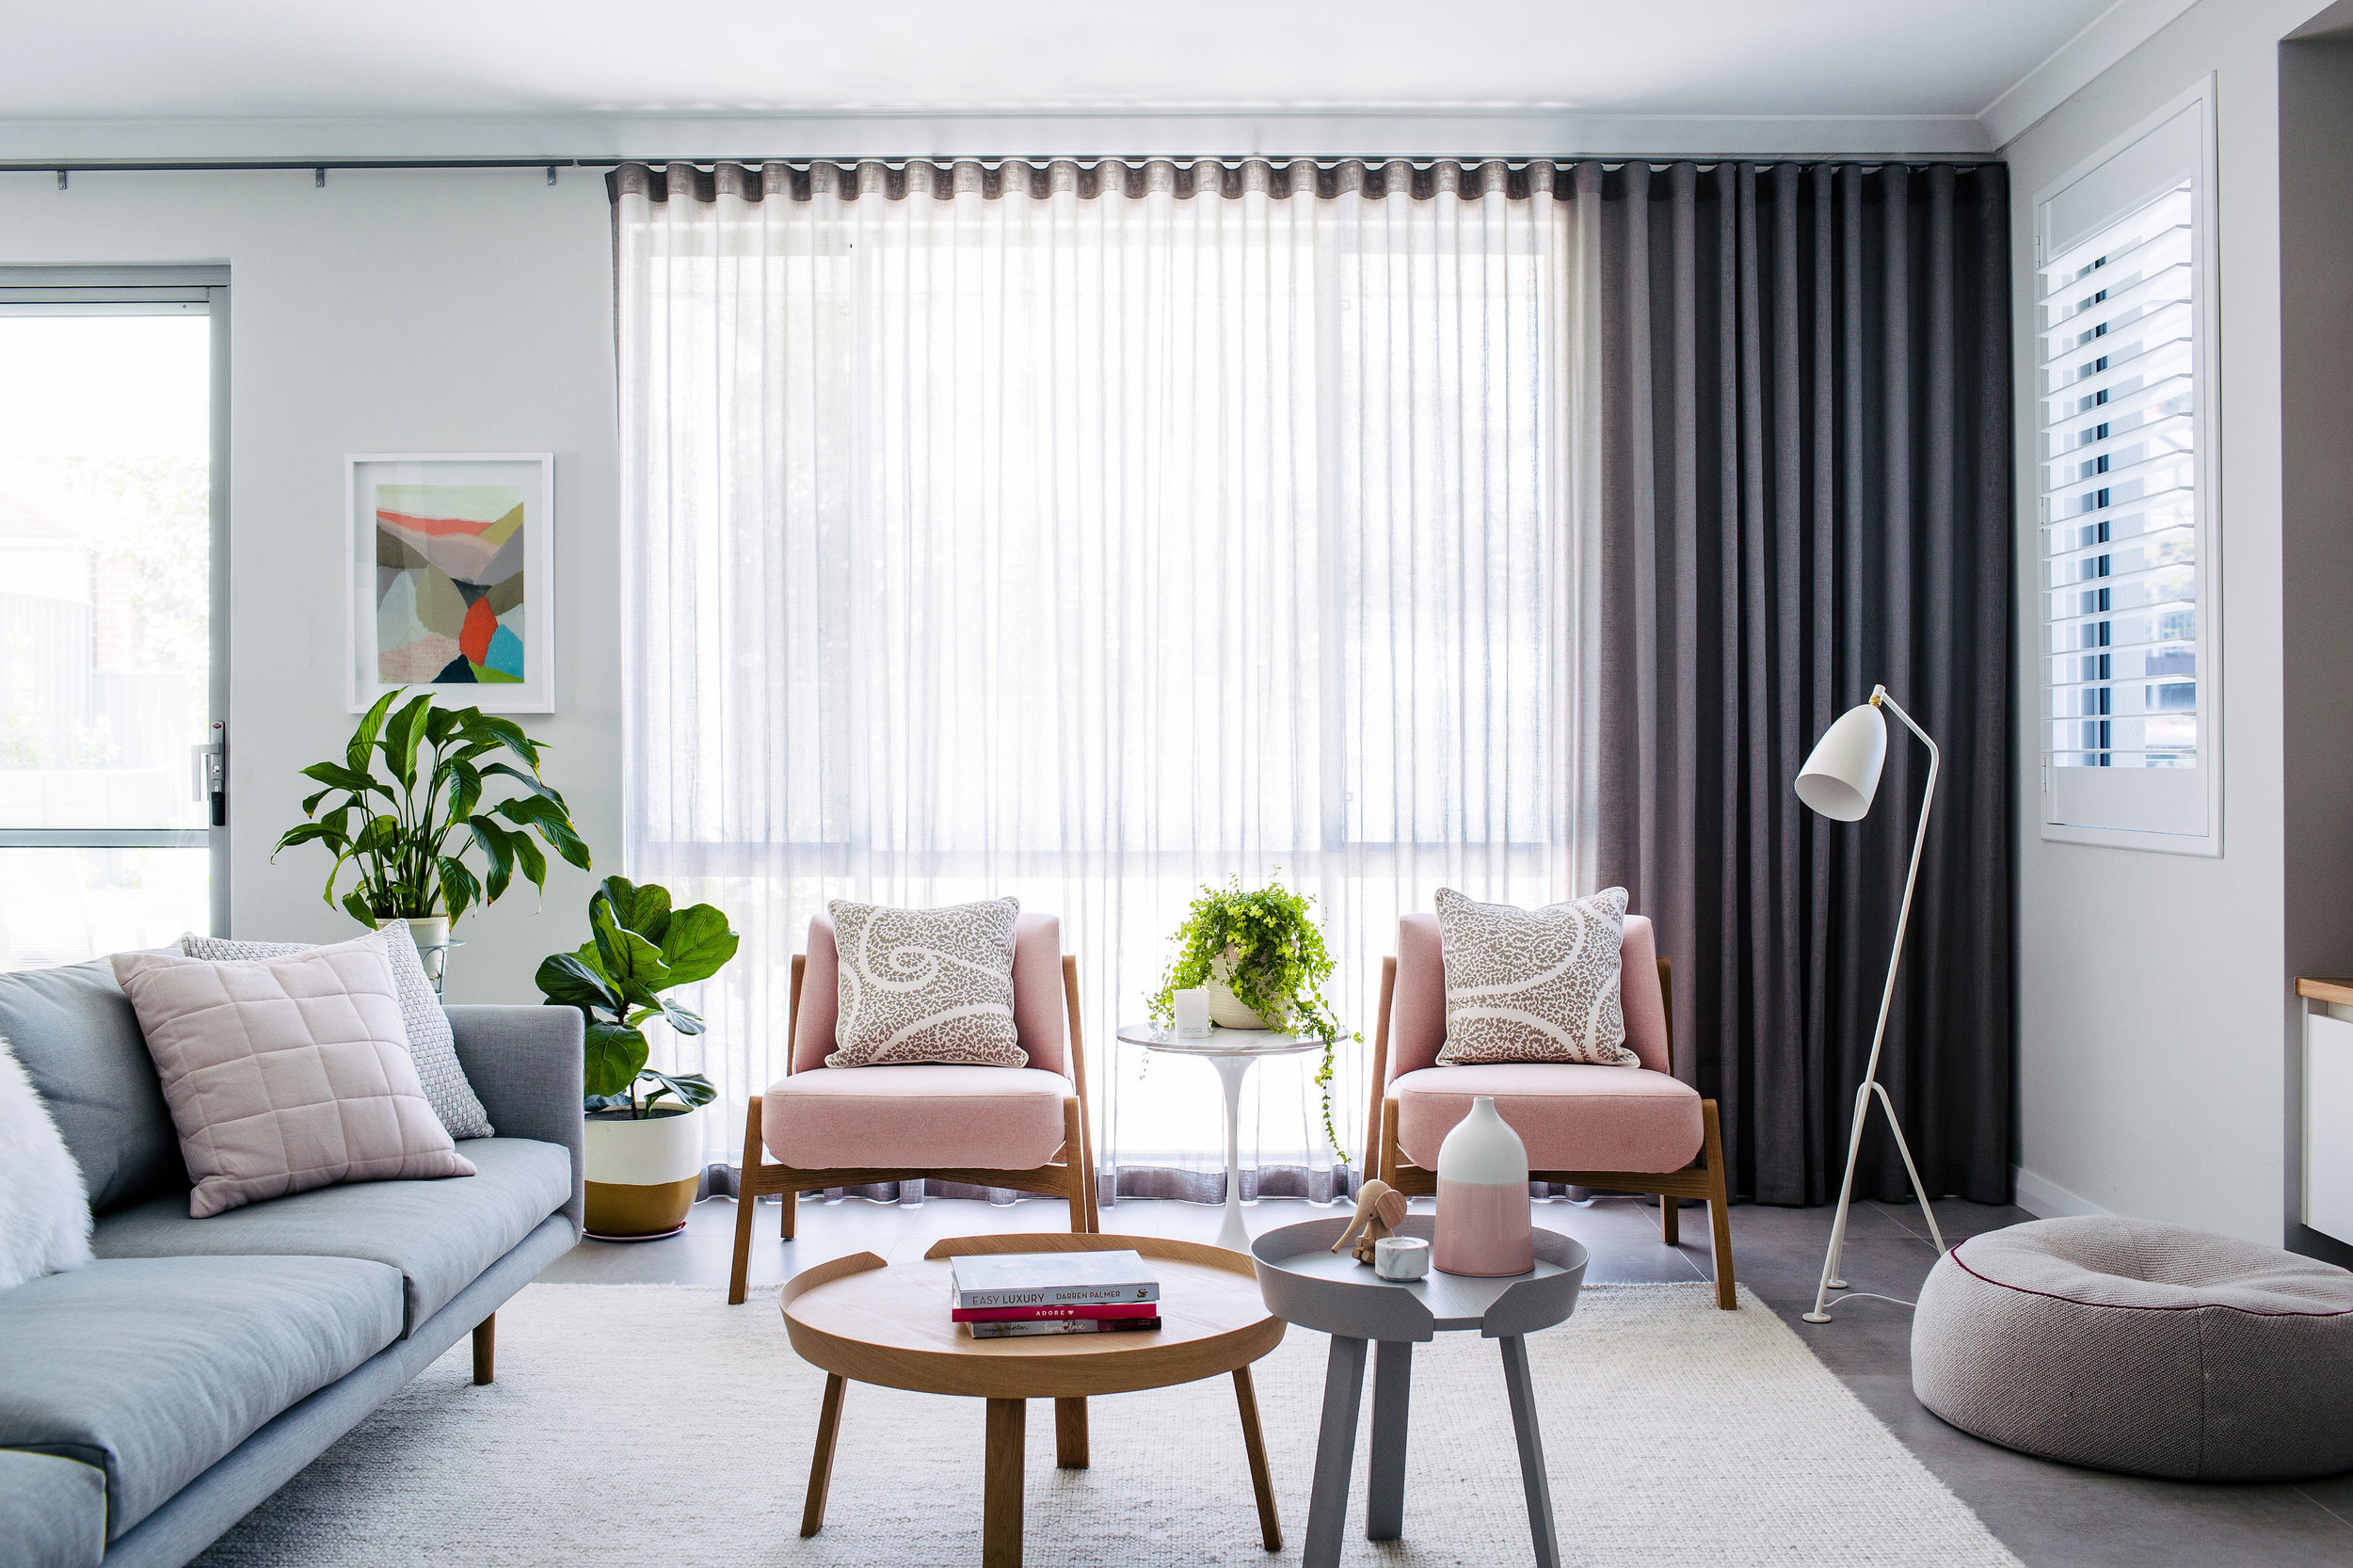 Benefits Of Sheer Window Curtains - How They Can Add Style in Your Home